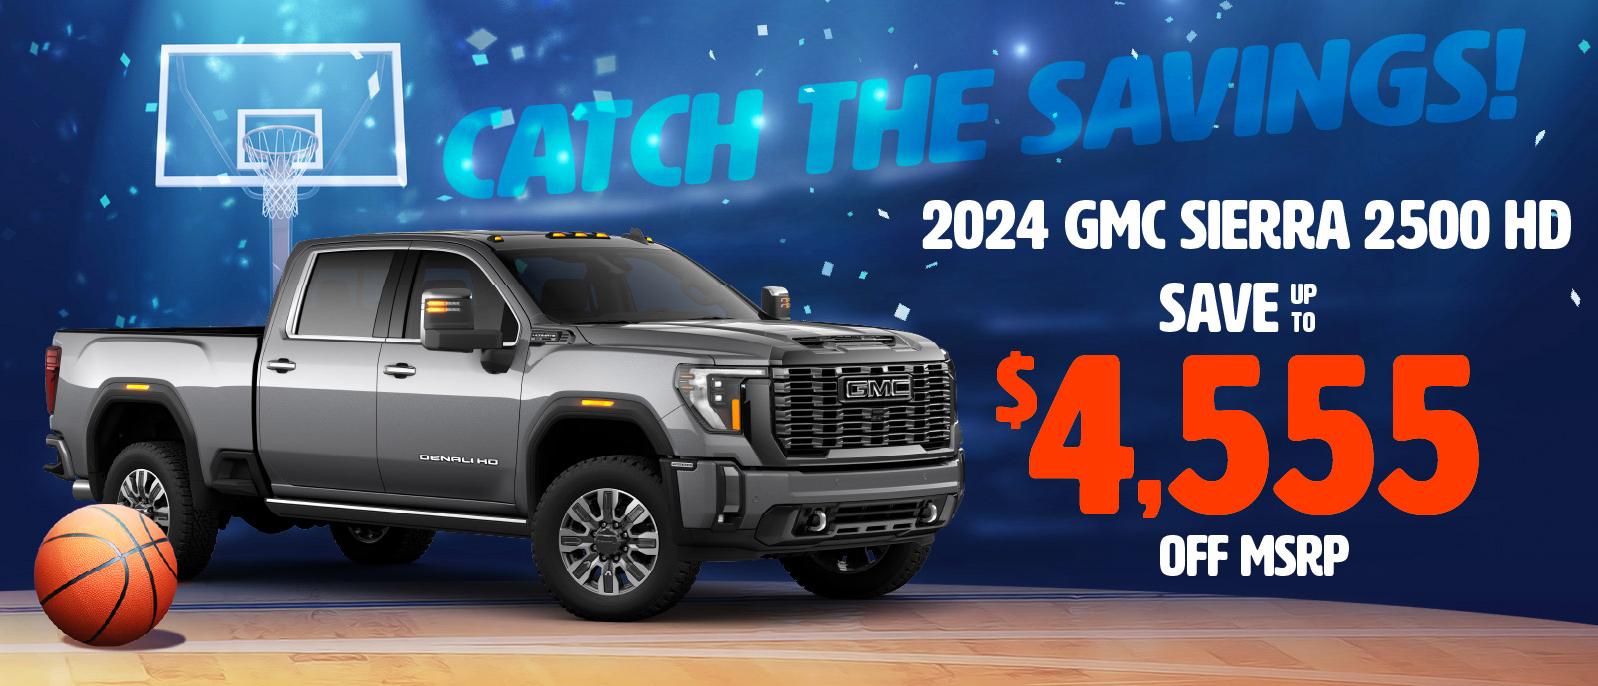 2024 GMC Sierra HD - SAVE up to $4555